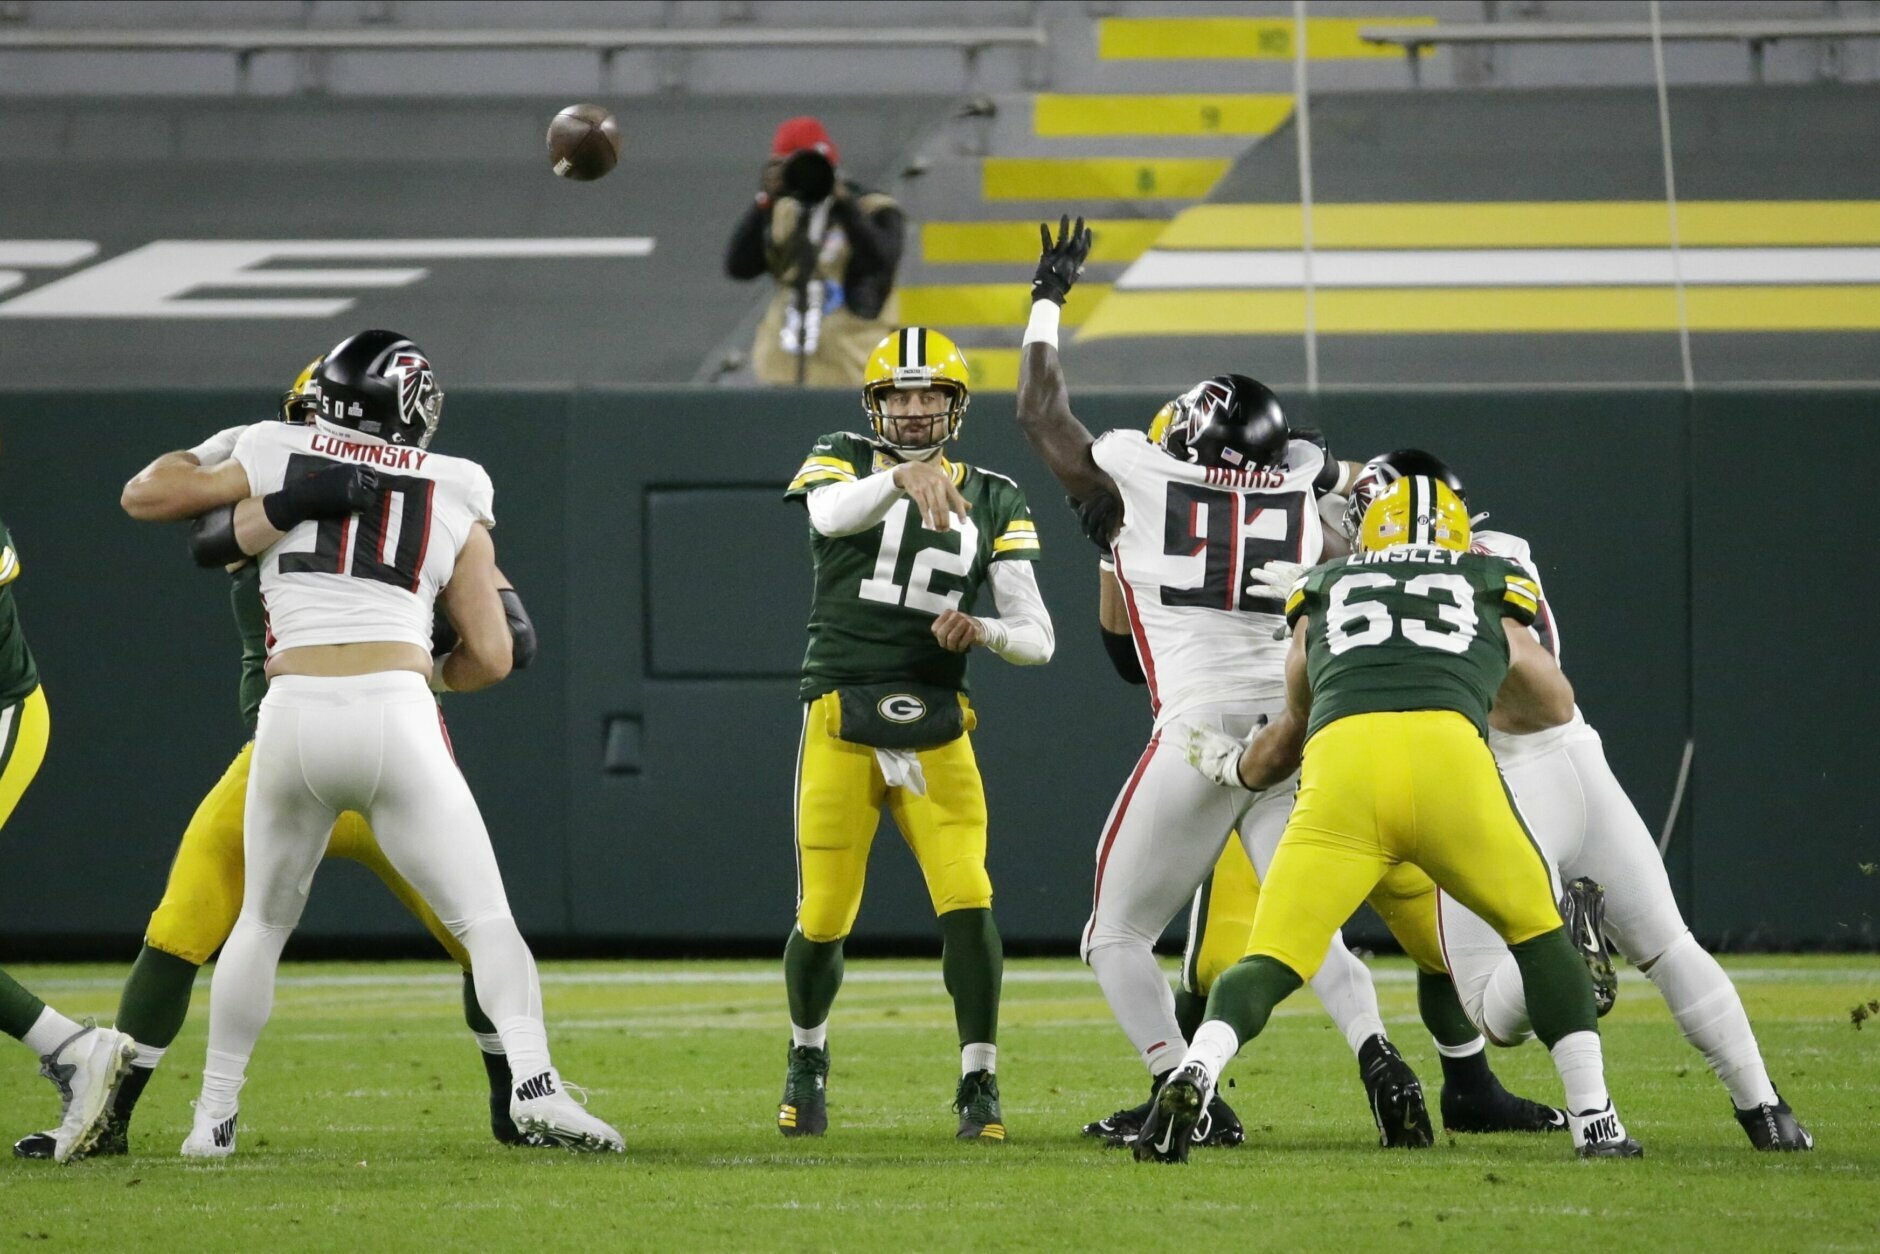 <p><b><i>Falcons 16</i></b><br />
<b><i>Packers 30</i></b></p>
<p>Look, I get that Atlanta&#8217;s secondary is banged up badly. But Aaron Rodgers didn&#8217;t have his top two receivers and still had a near-perfect passer rating to stay undefeated on Monday Night Football since 2014. Green Bay looks like the team to beat in the NFC.</p>
